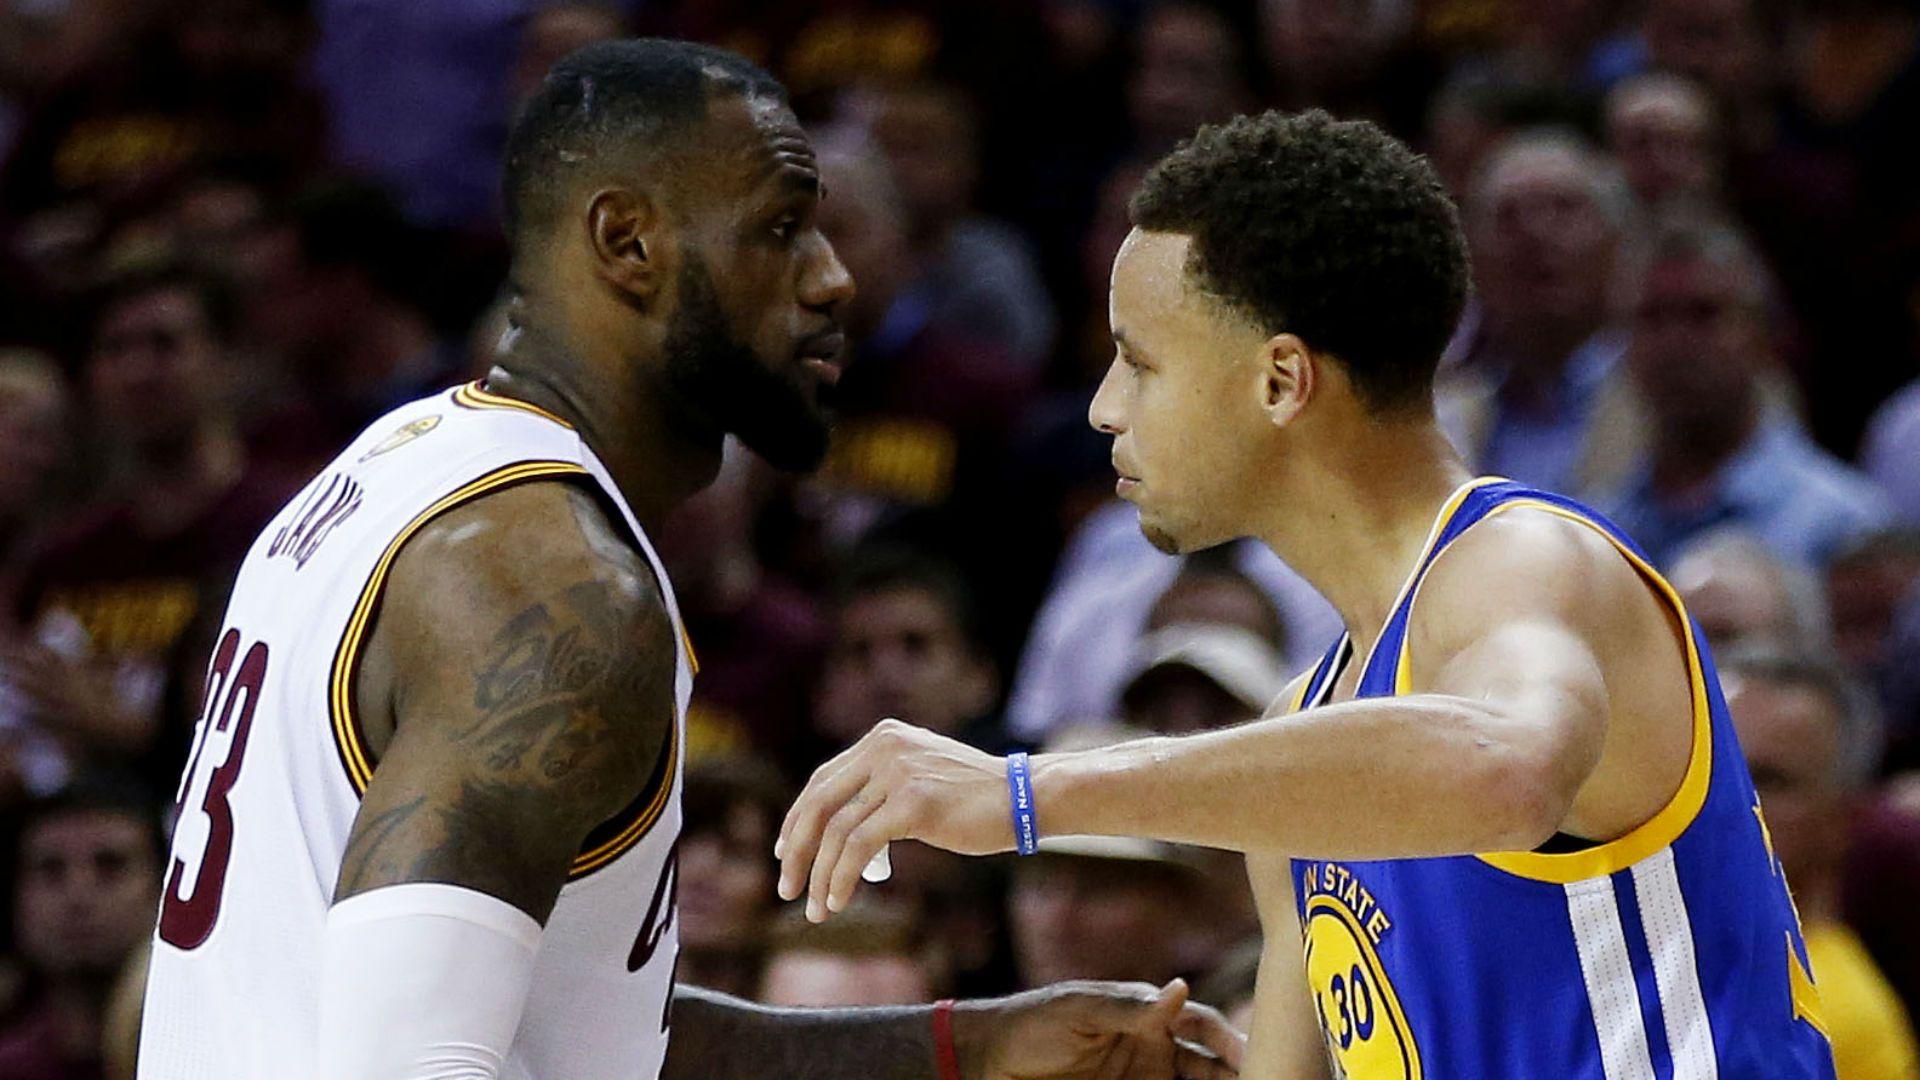 Stephen Curry is over comparisons to LeBron James: 'I'm trying to